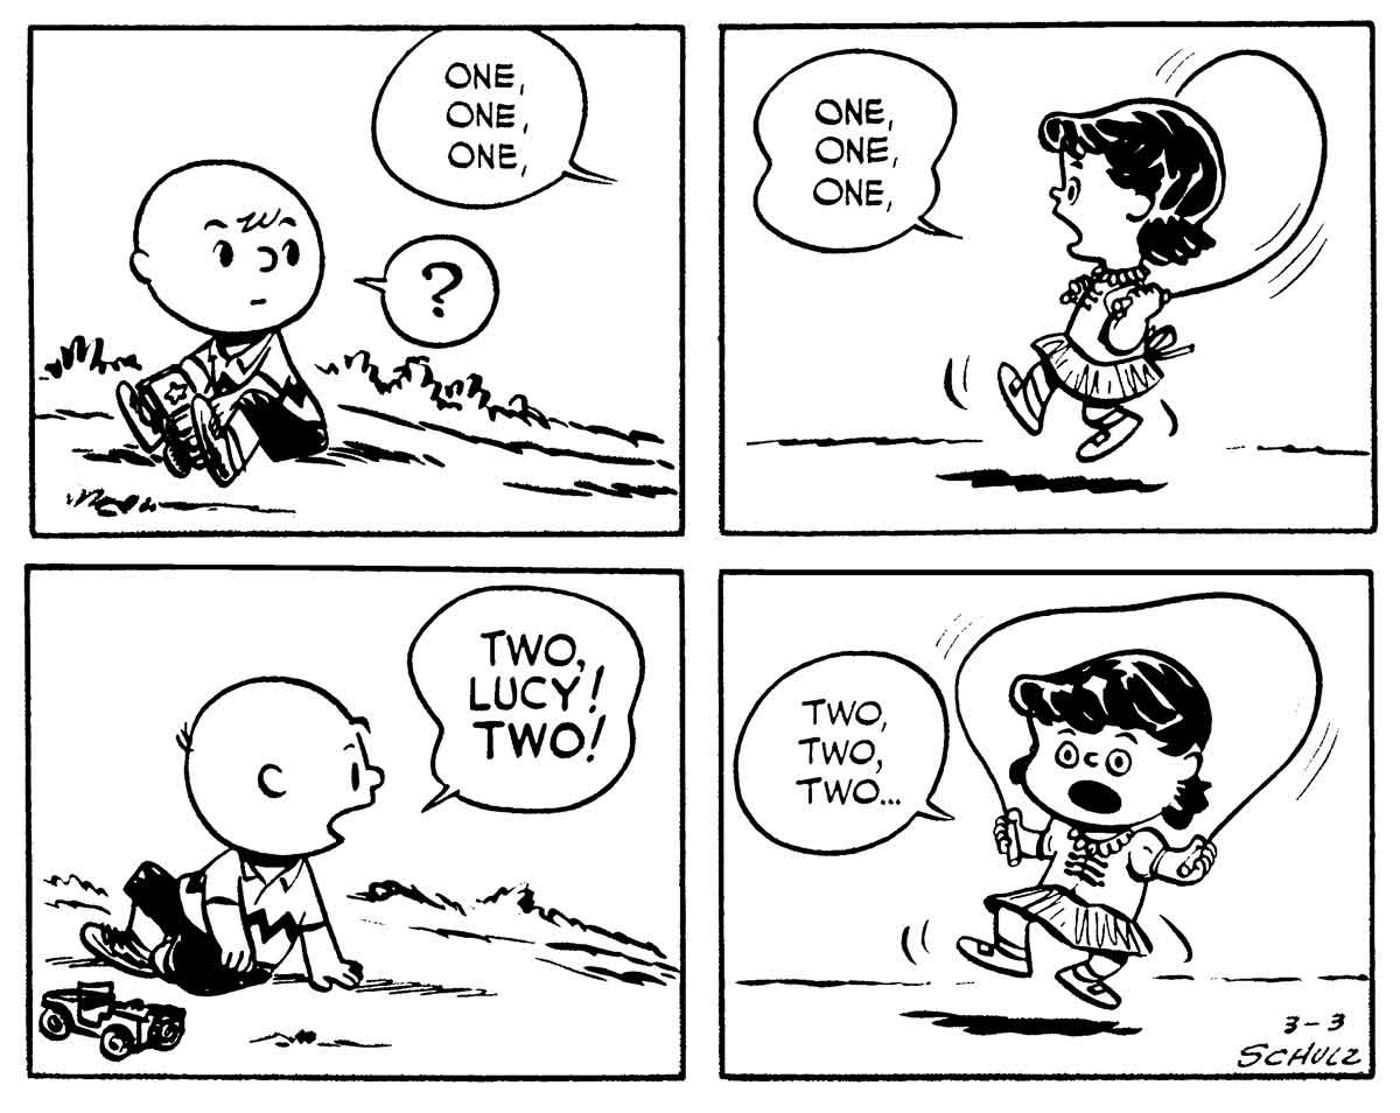 Lucy's First Appearance in Peanuts